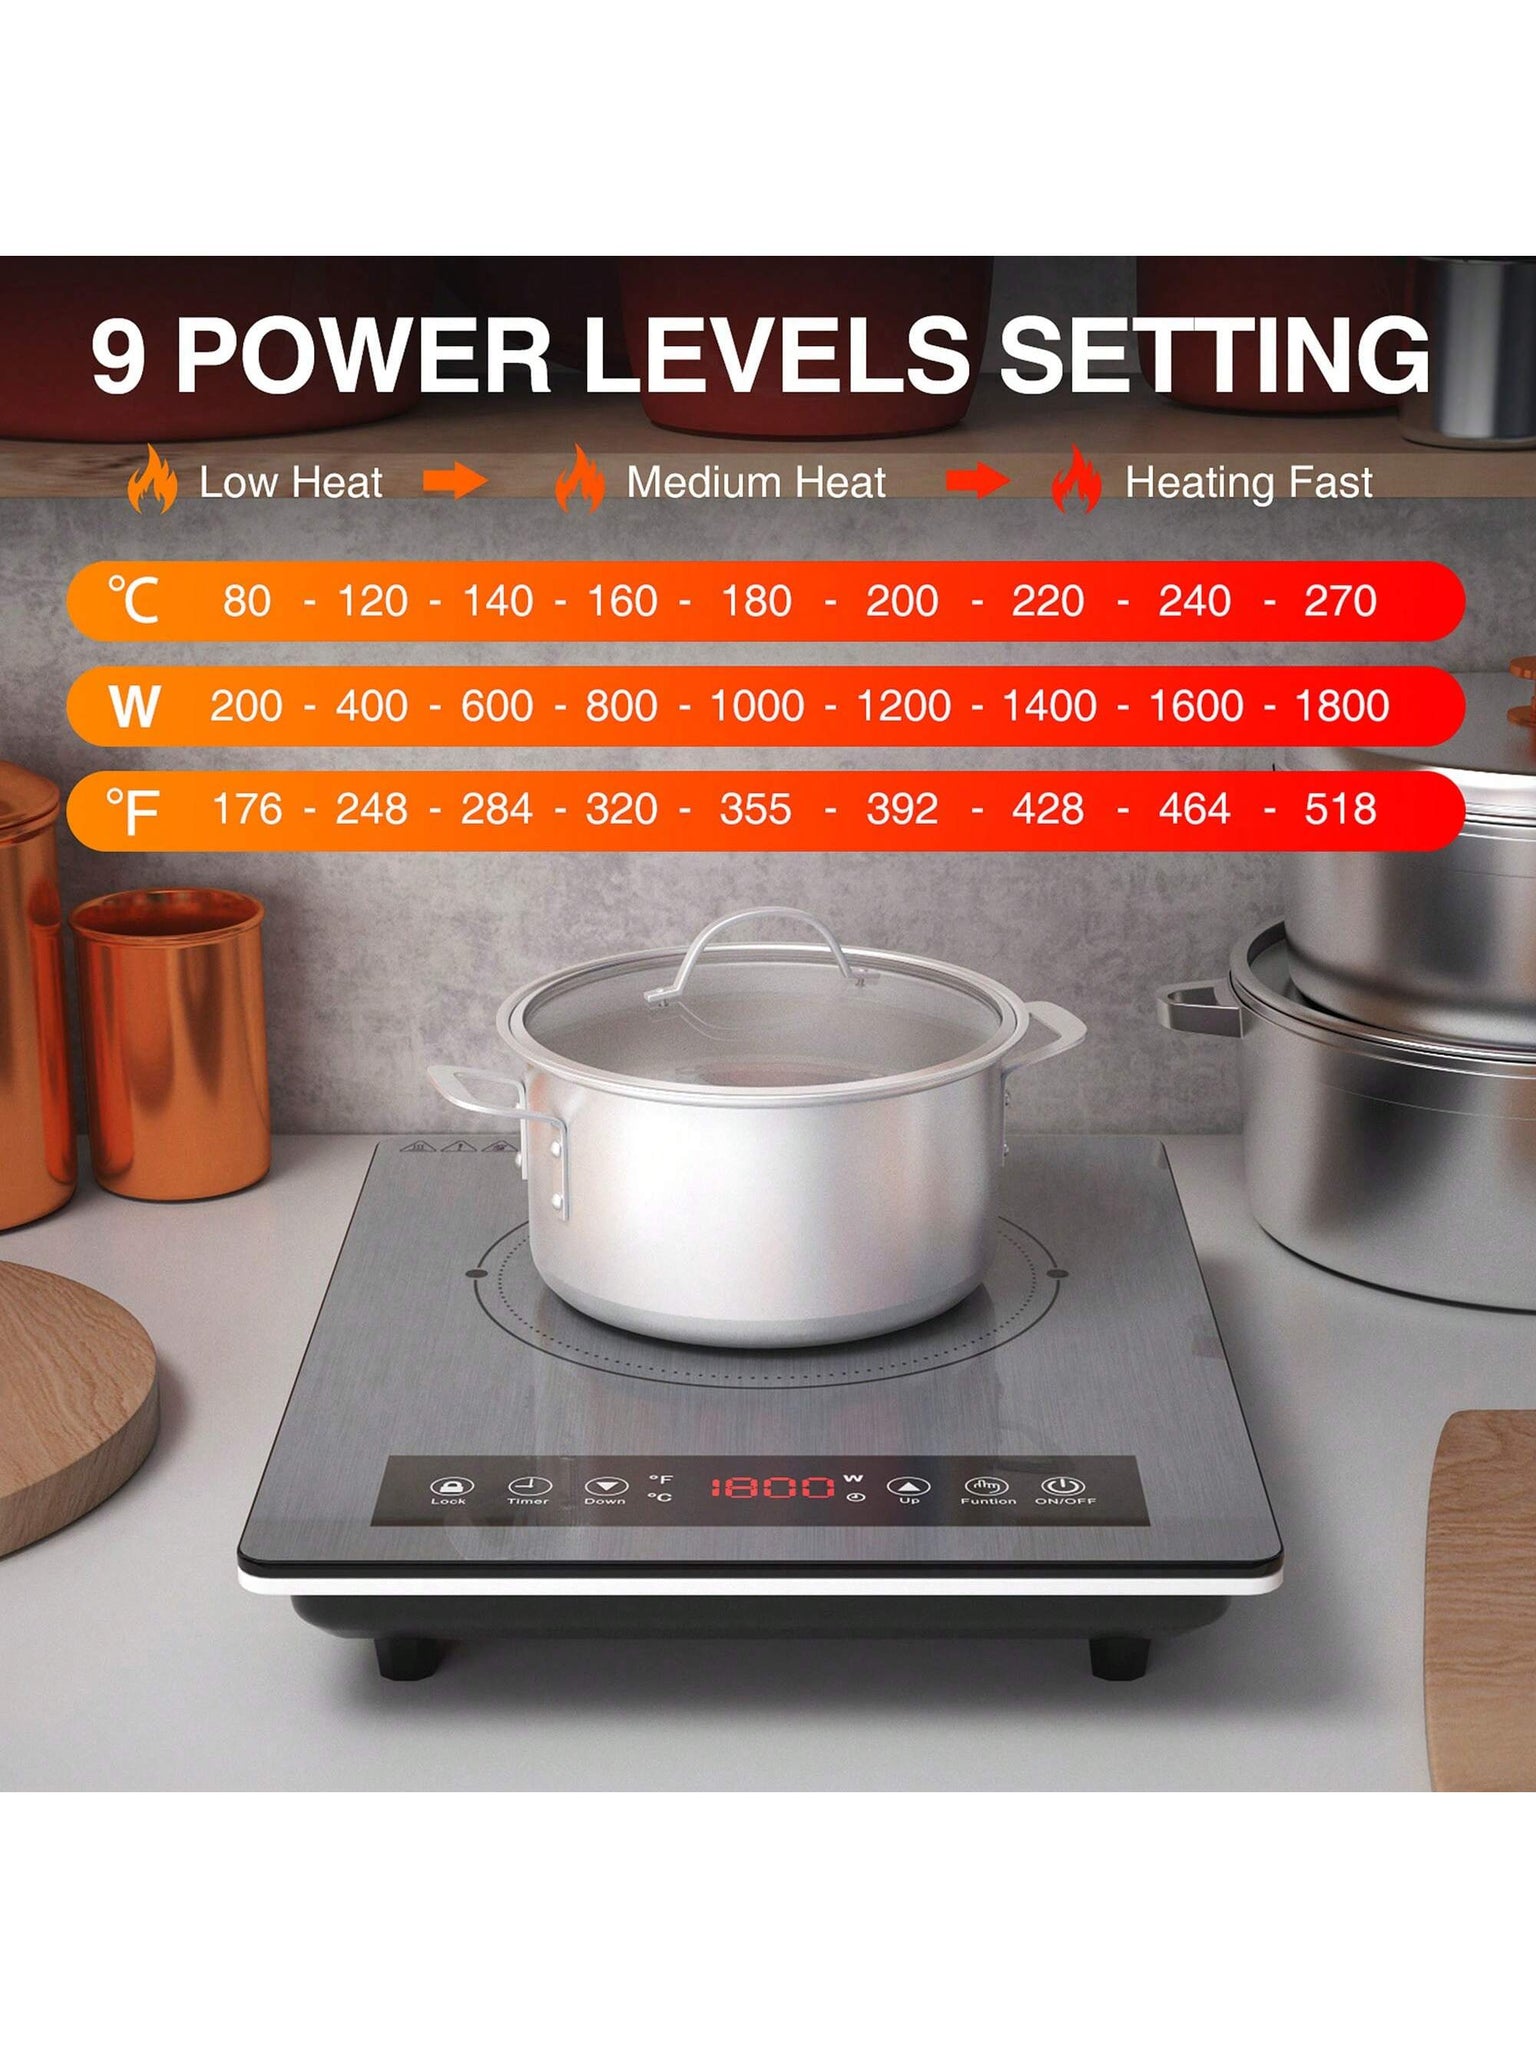 YONGSTYLE Electric Double Burner Hot Plate for Cooking, 1800W